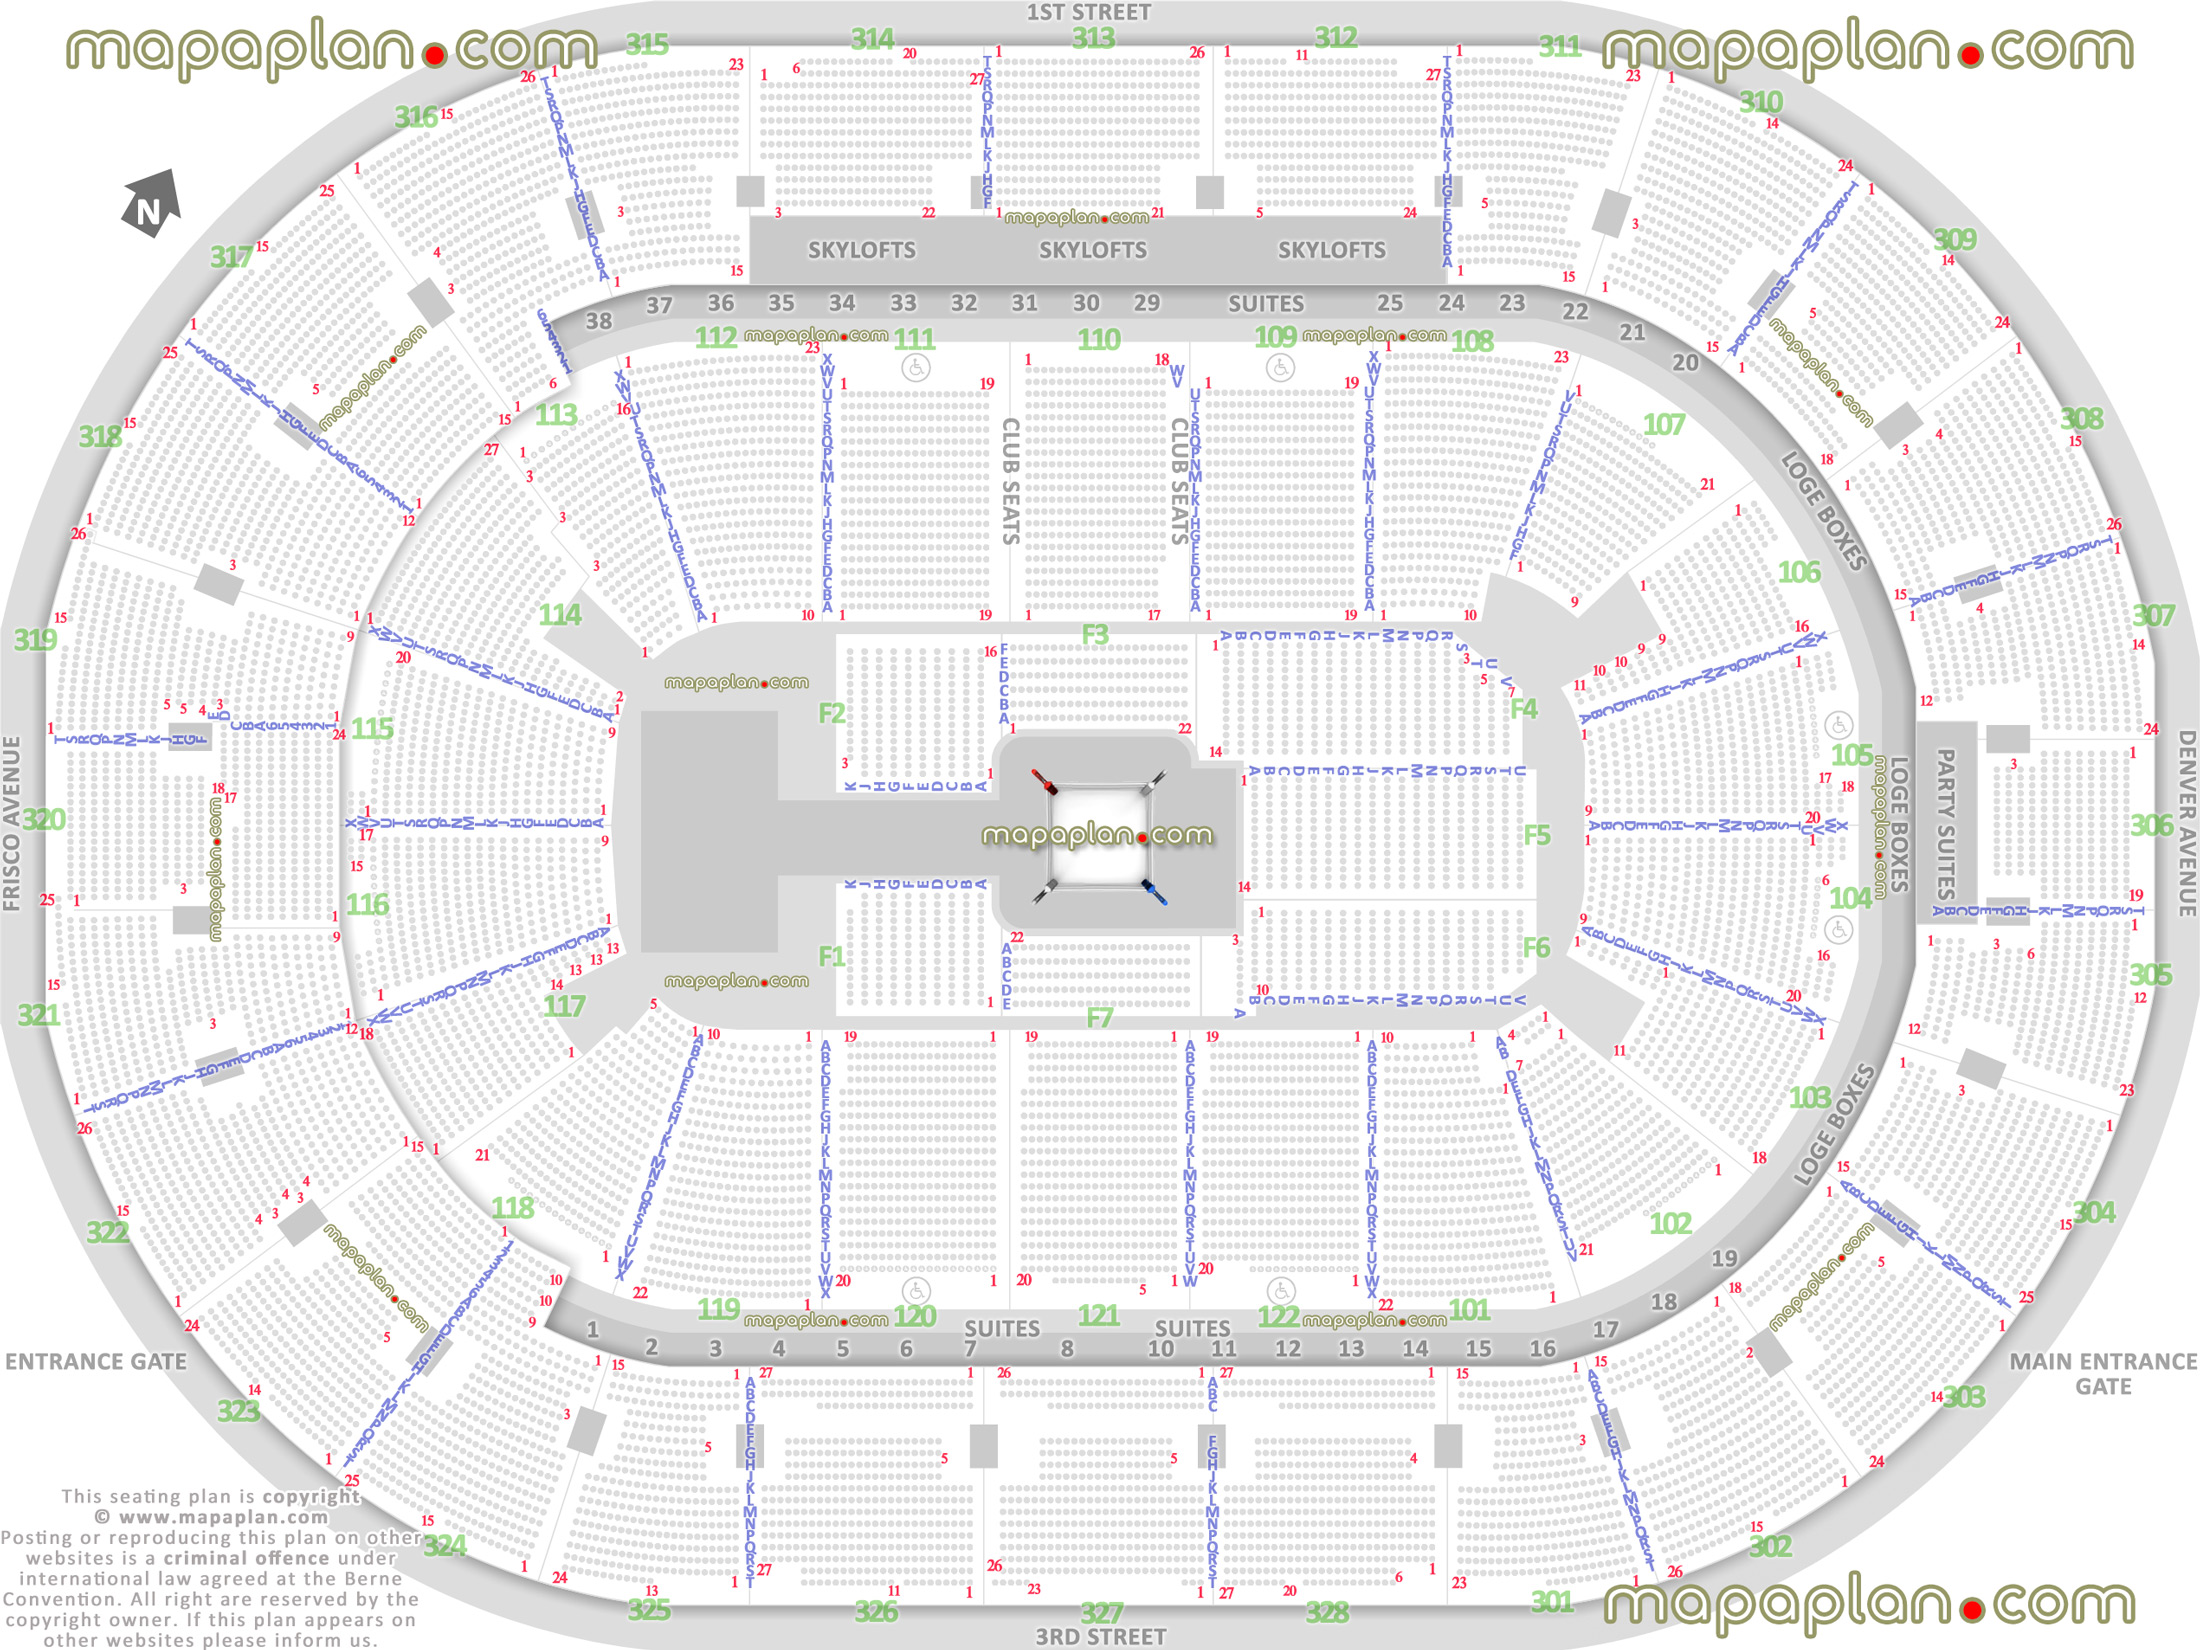 wwe wrestling ufc mma fights boxing match events map row 360 round ring configuration how many rows sections 301 302 303 304 305 306 307 308 309 310 311 312 313 314 315 316 317 318 319 320 321 322 323 324 325 326 327 328 Tulsa BOK Center seating chart